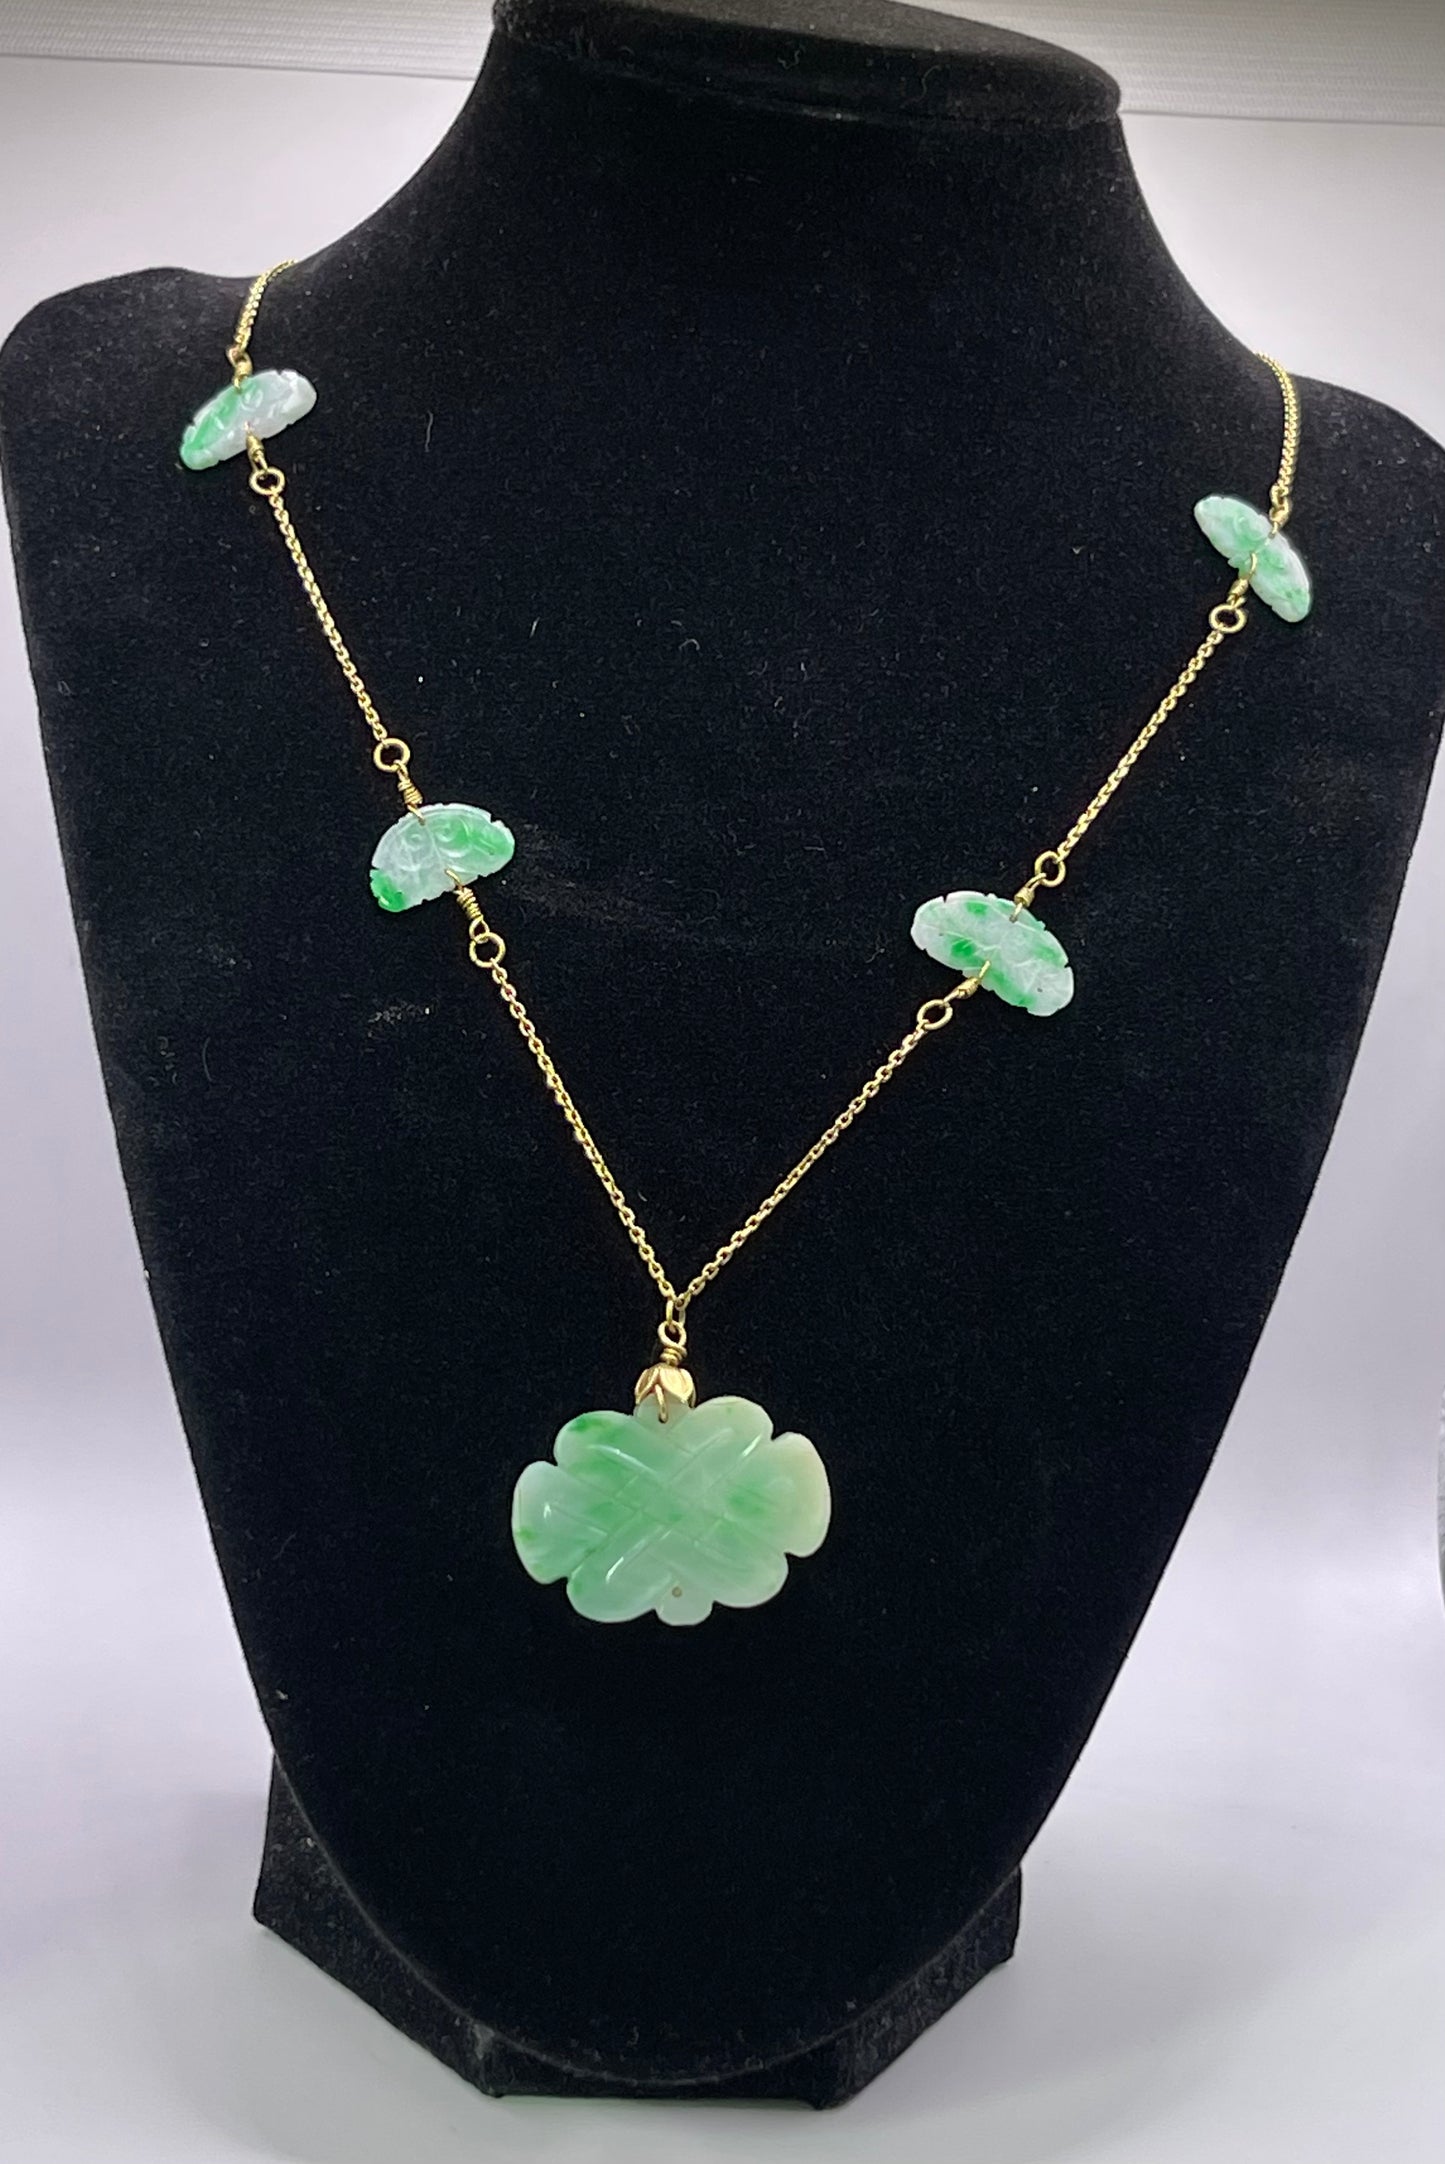 A vintage Art Deco style necklace with an antique apple green jade carved plaque and smaller plaques on 14kt chain